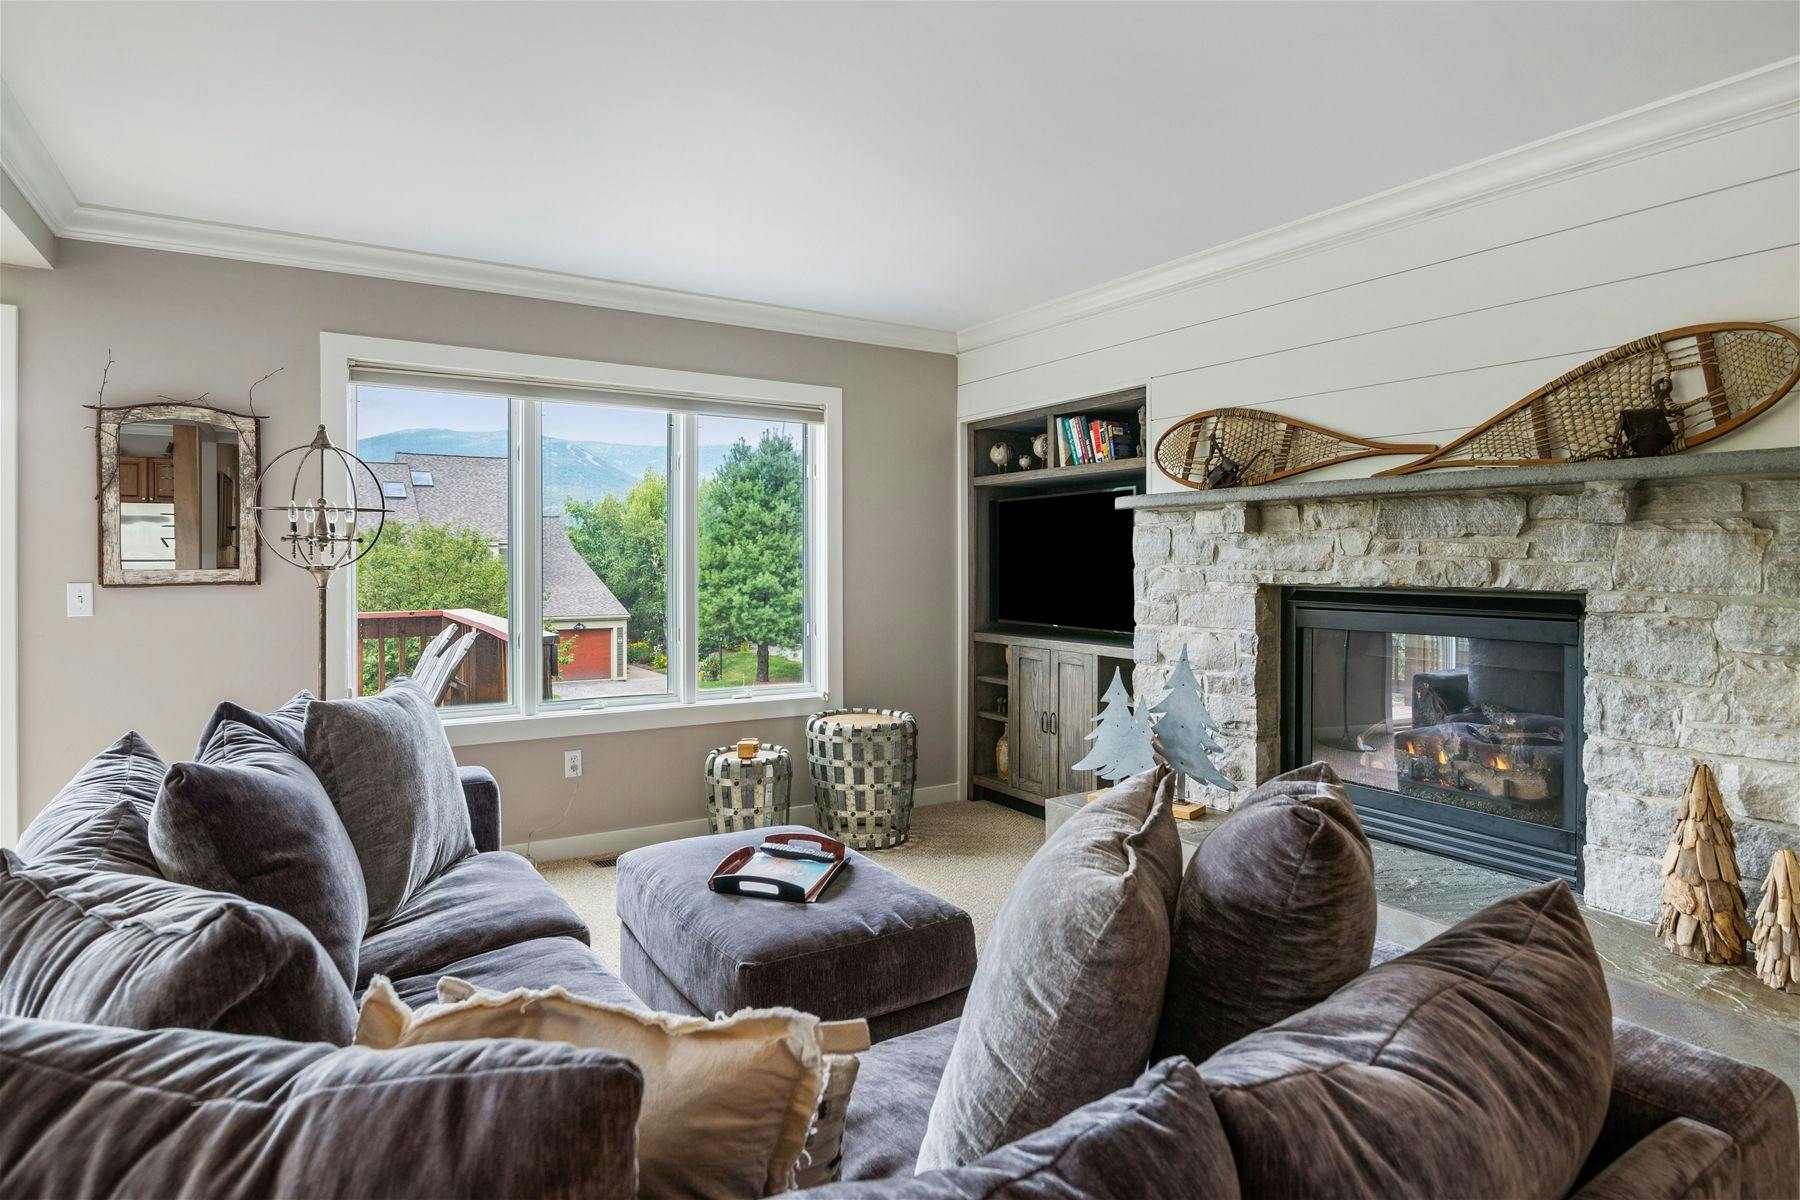 Living space at Stowe vacation rental home